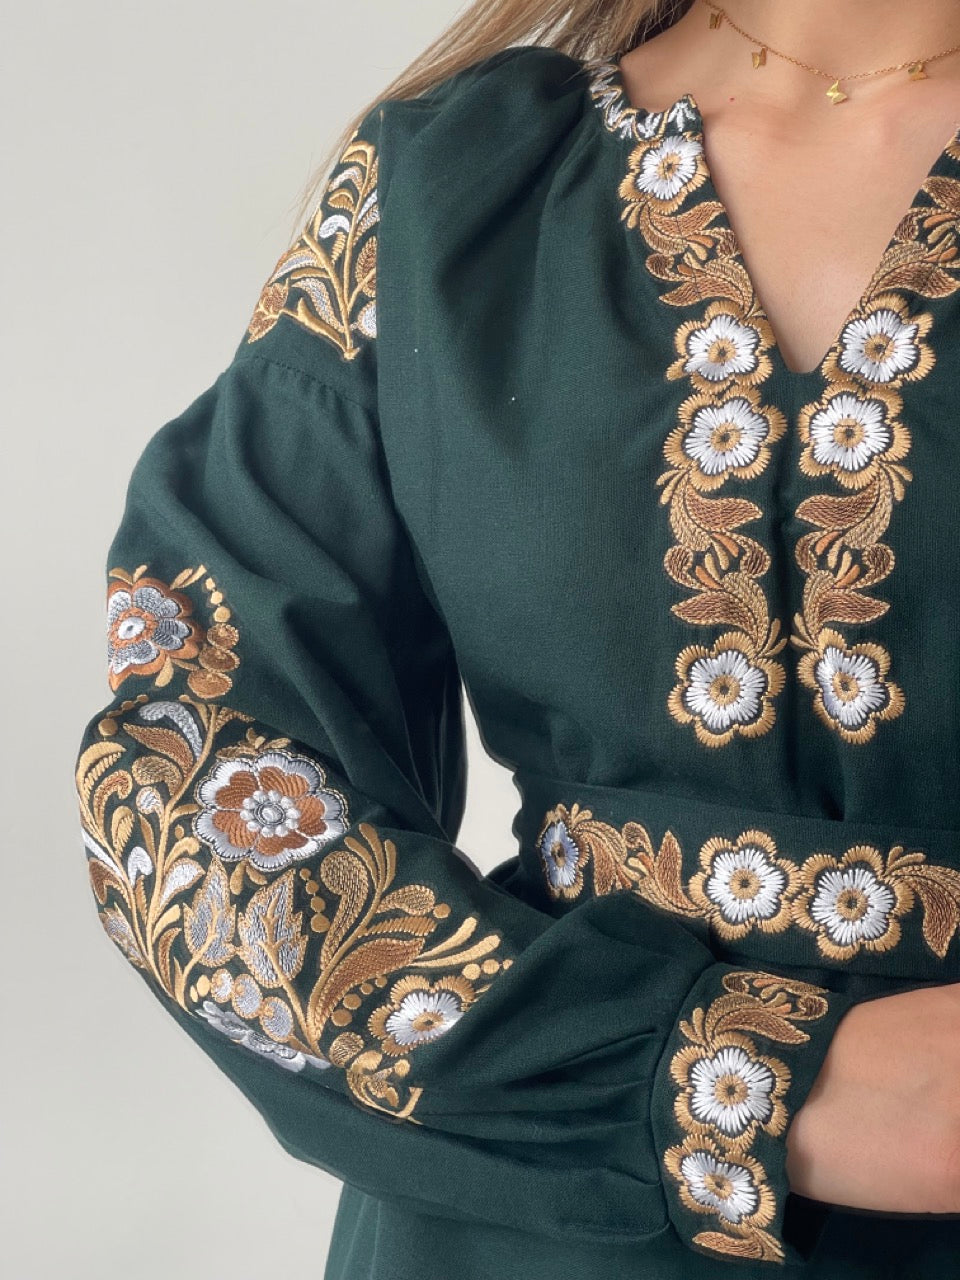 The Dark Green Dress with Golden Embroidery